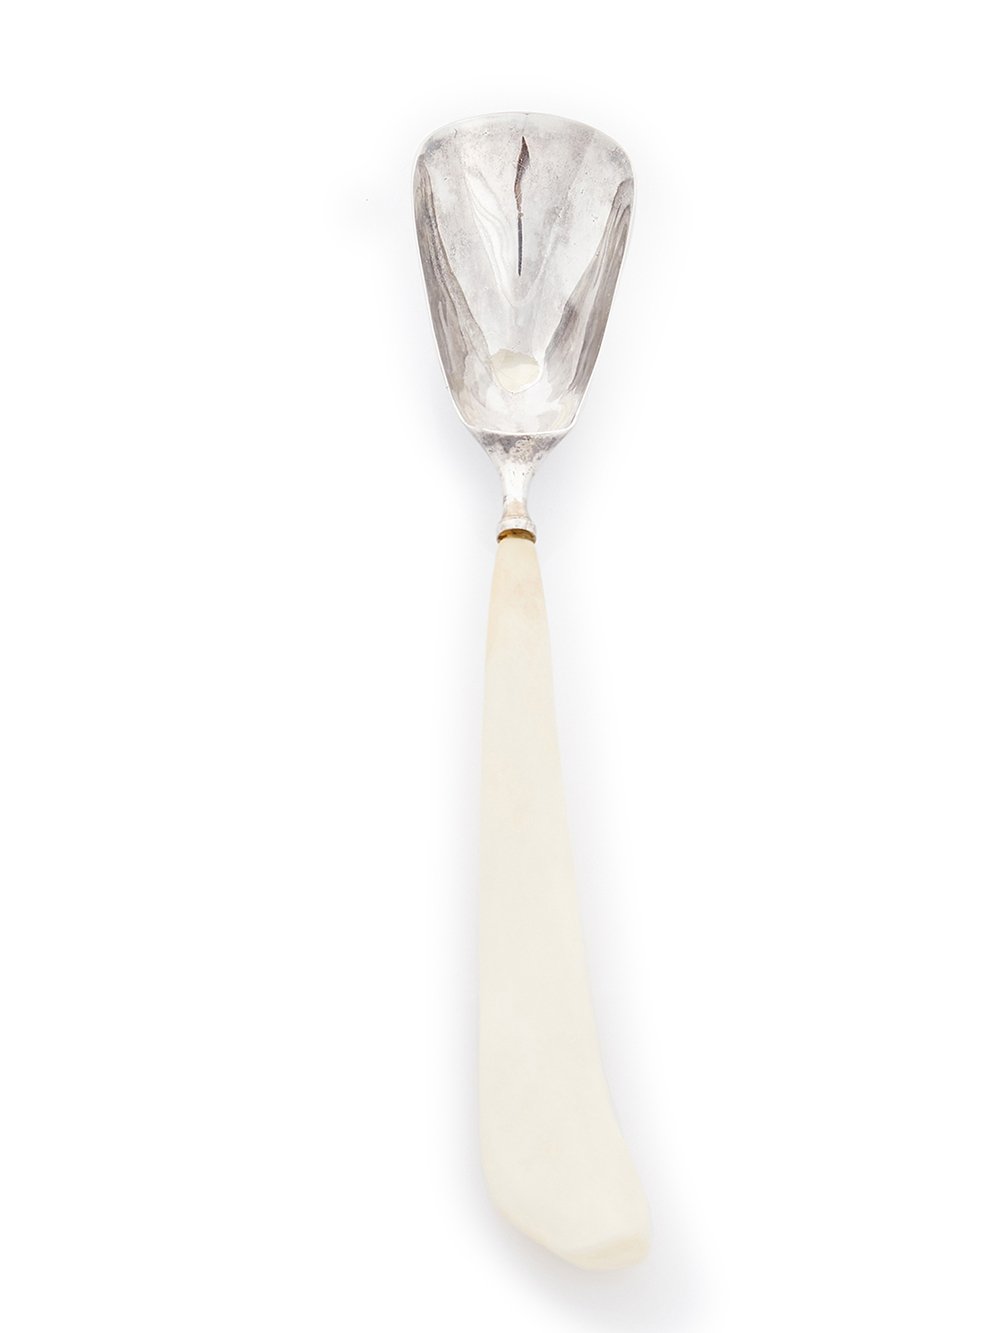 RICK OWENS SERVING SPOON FEATURES A BIG STERLING TOP AND A LONG, NATURAL COLOR BONE HANDLE.